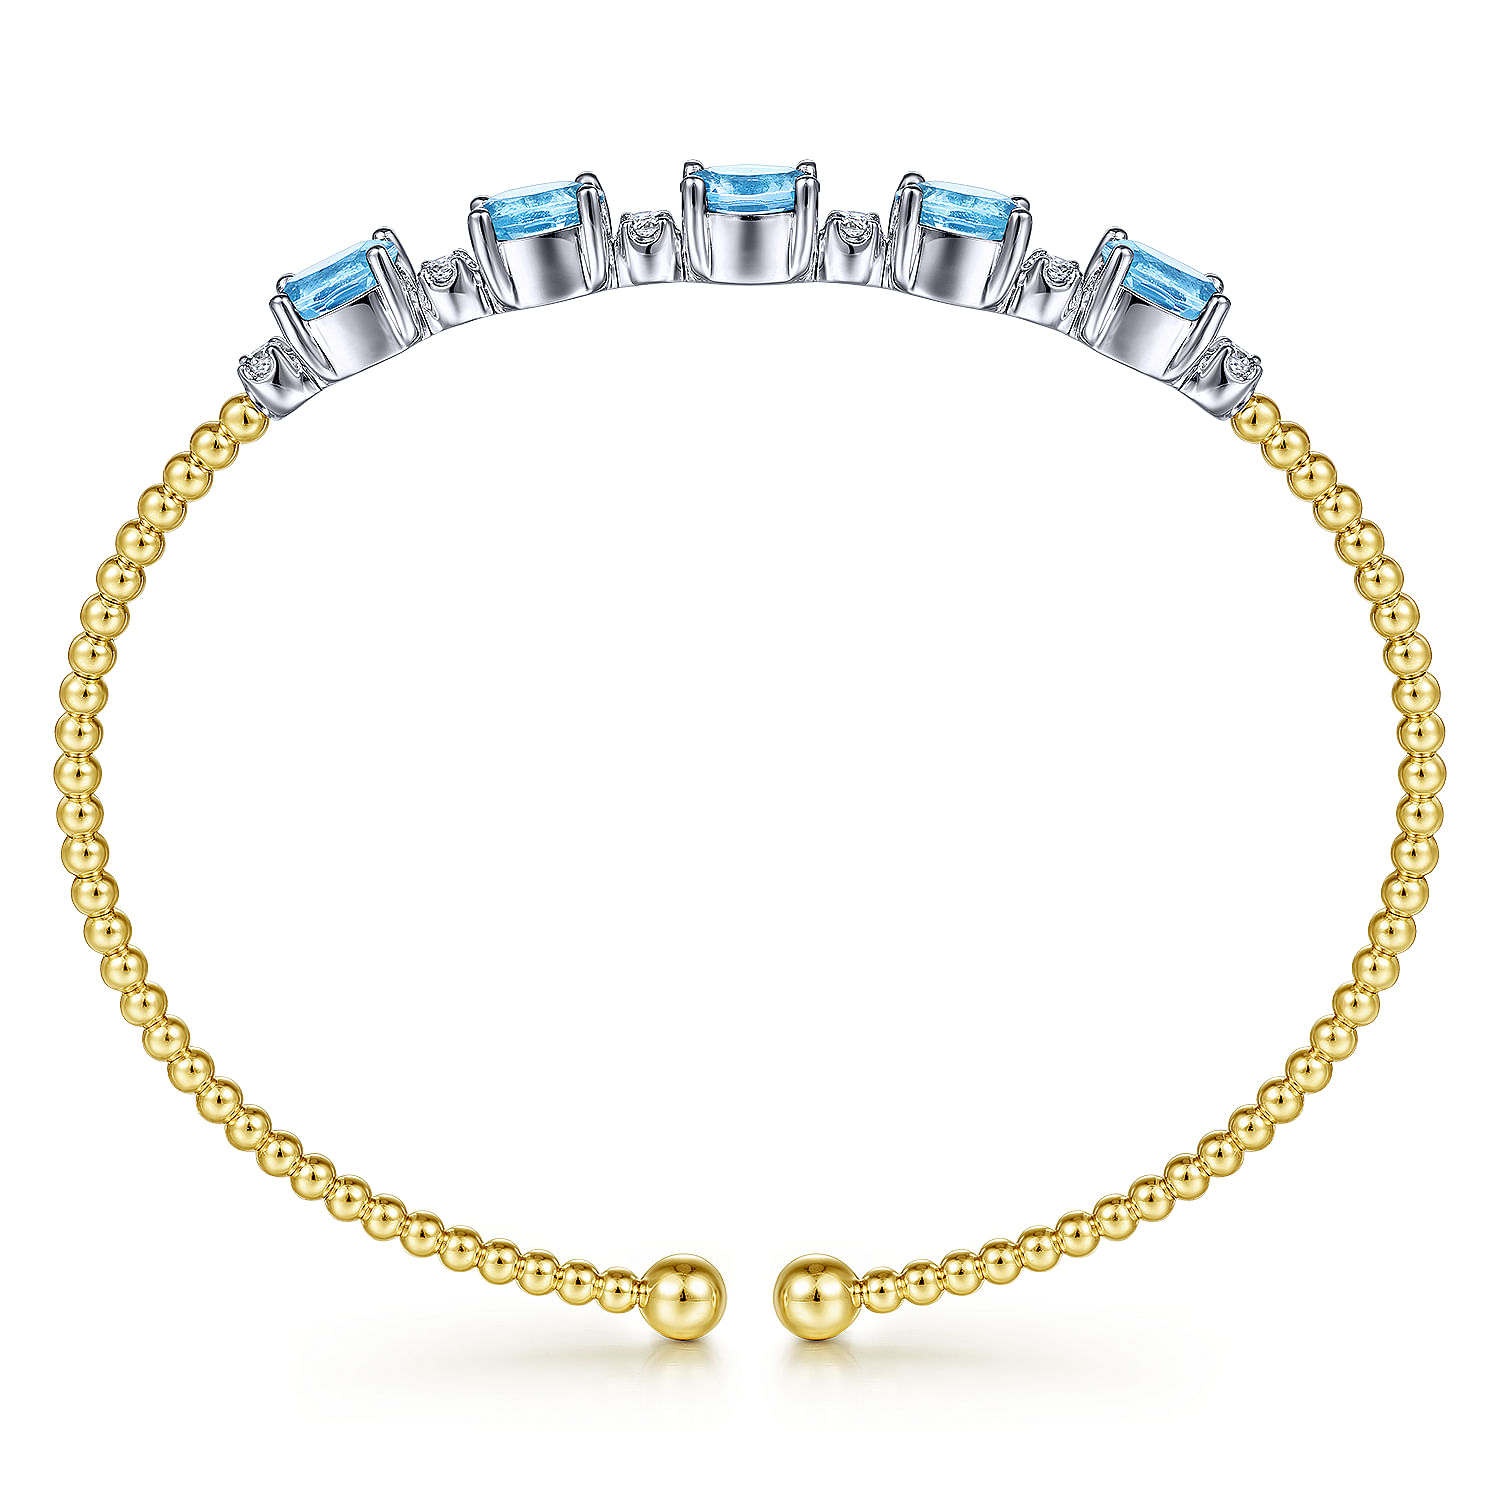 14K White-Yellow Gold Bujukan Bead Cuff Bracelet with Blue Topaz and Diamond Stations